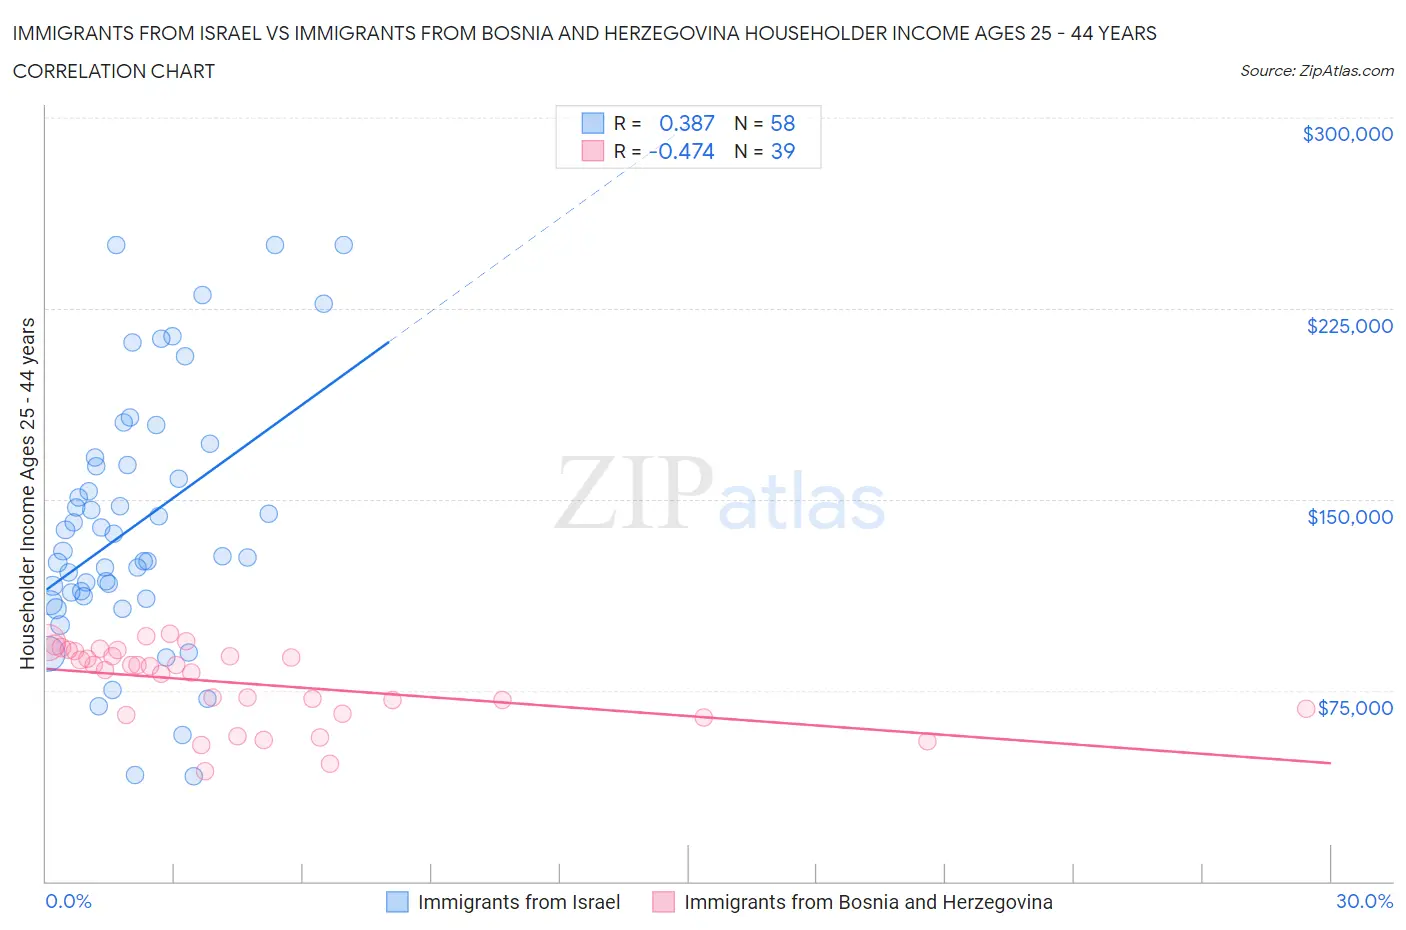 Immigrants from Israel vs Immigrants from Bosnia and Herzegovina Householder Income Ages 25 - 44 years